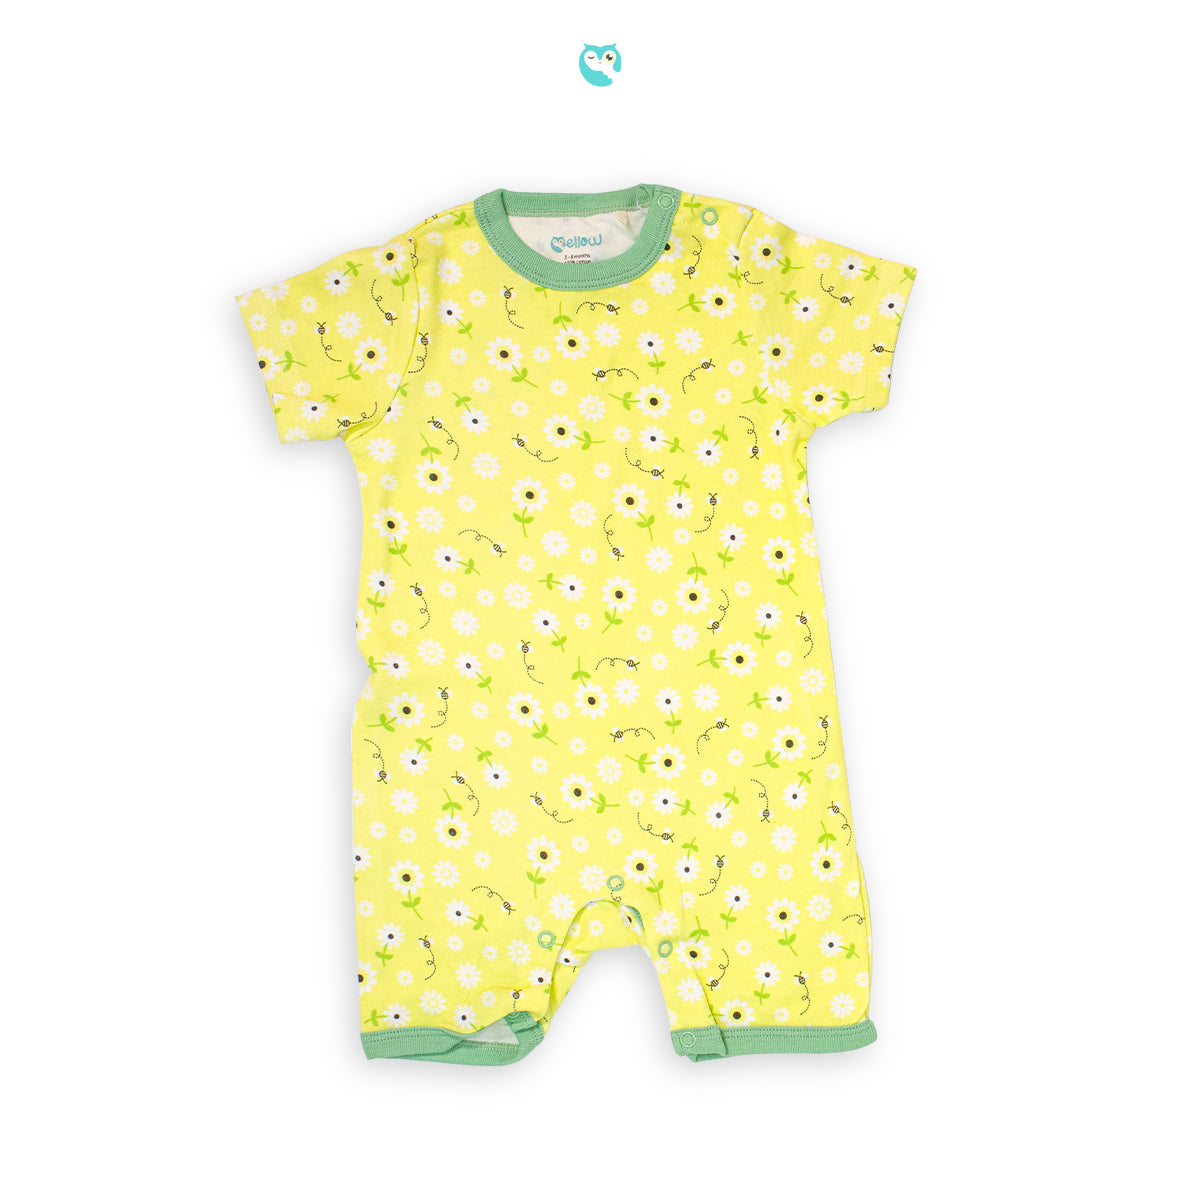 Mellow Allover Yellow Floral Romper (square bottom)